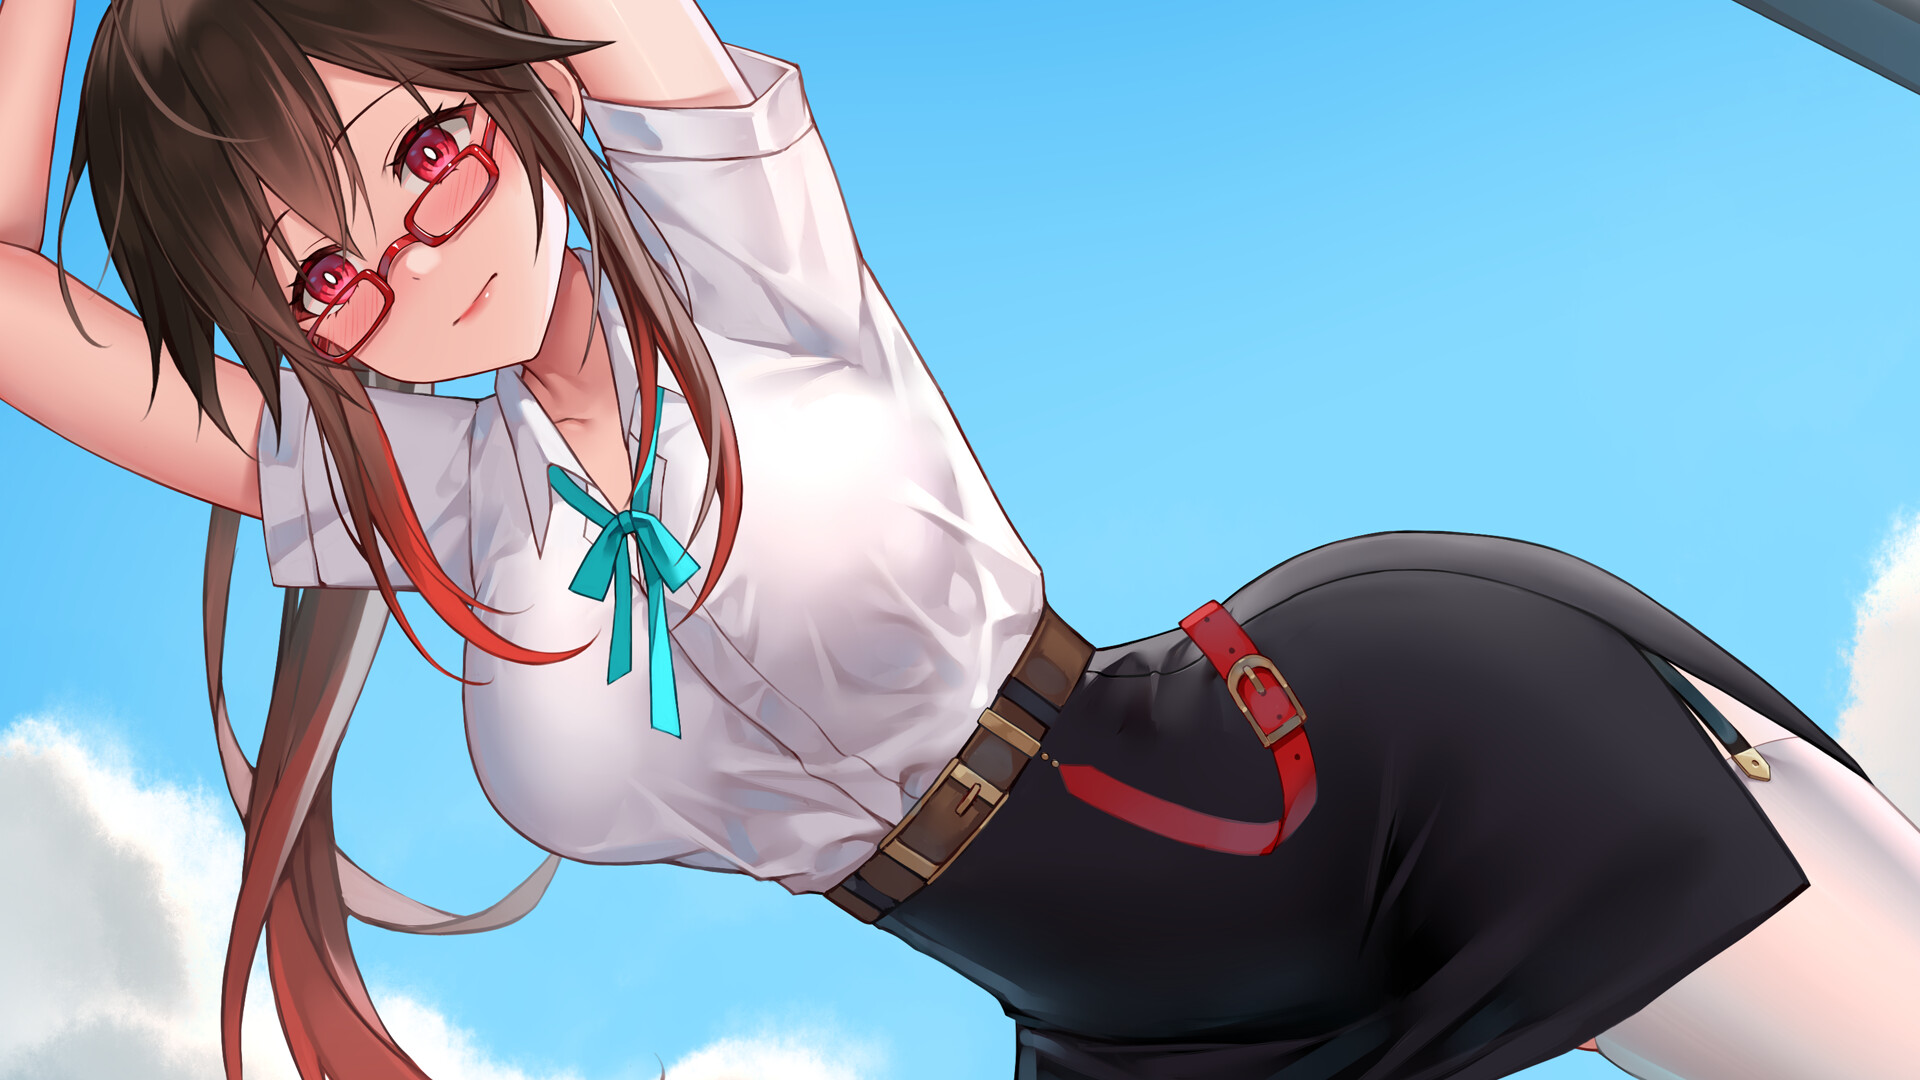 Hot And Lovely: Uniform [Final] [Lovely Games]